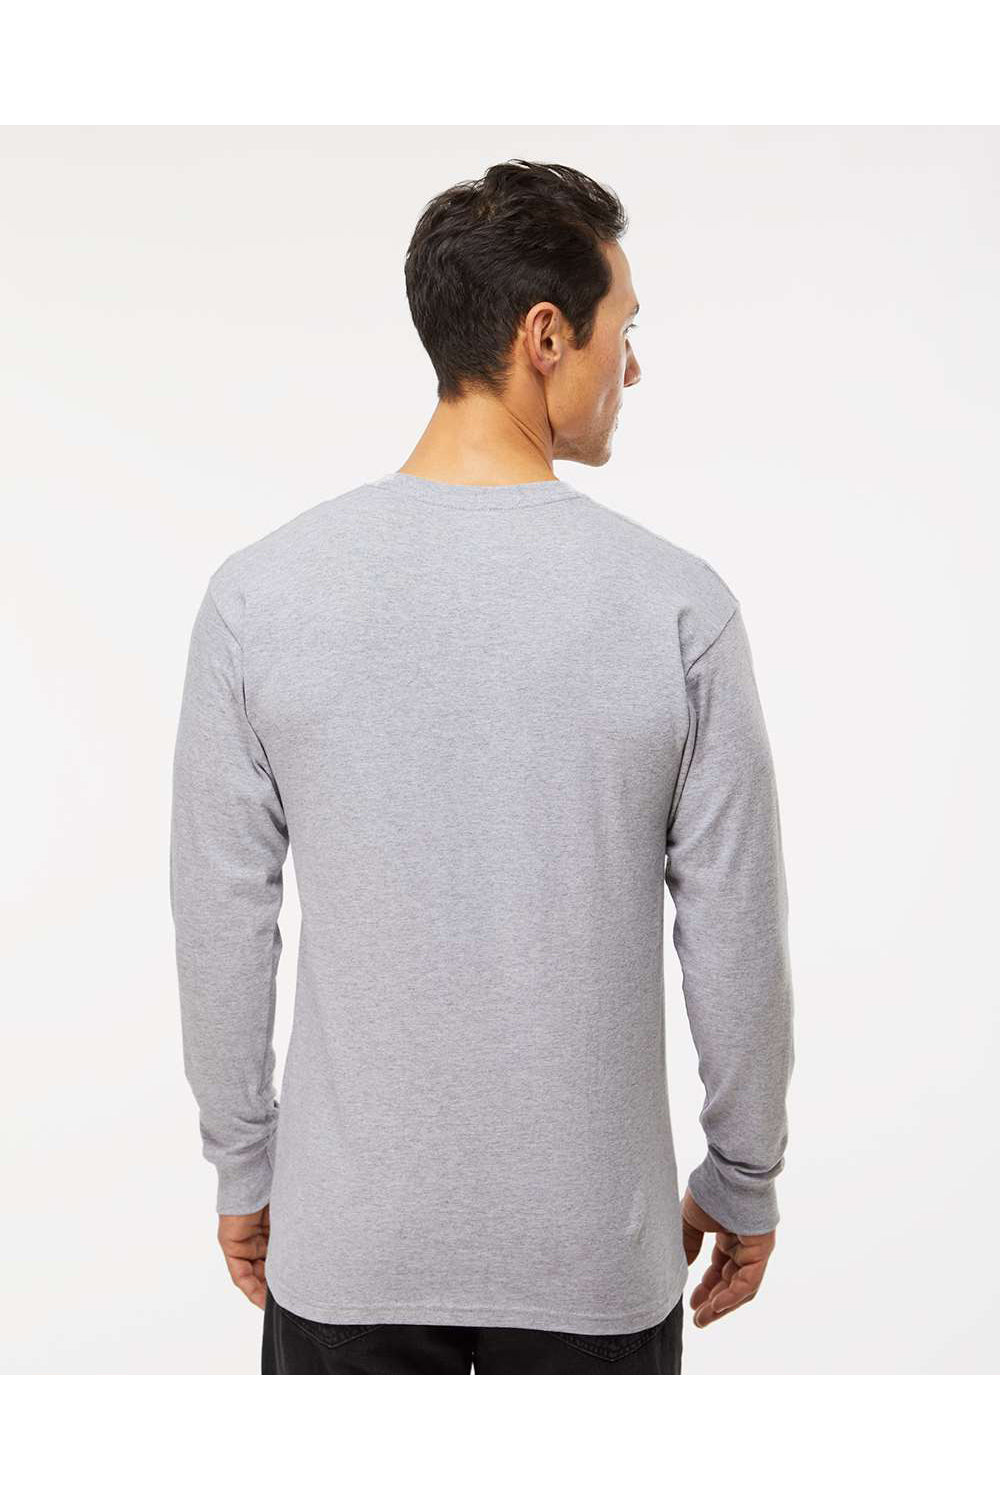 M&O 4820 Mens Gold Soft Touch Long Sleeve Crewneck T-Shirt Athletic Grey Model Back